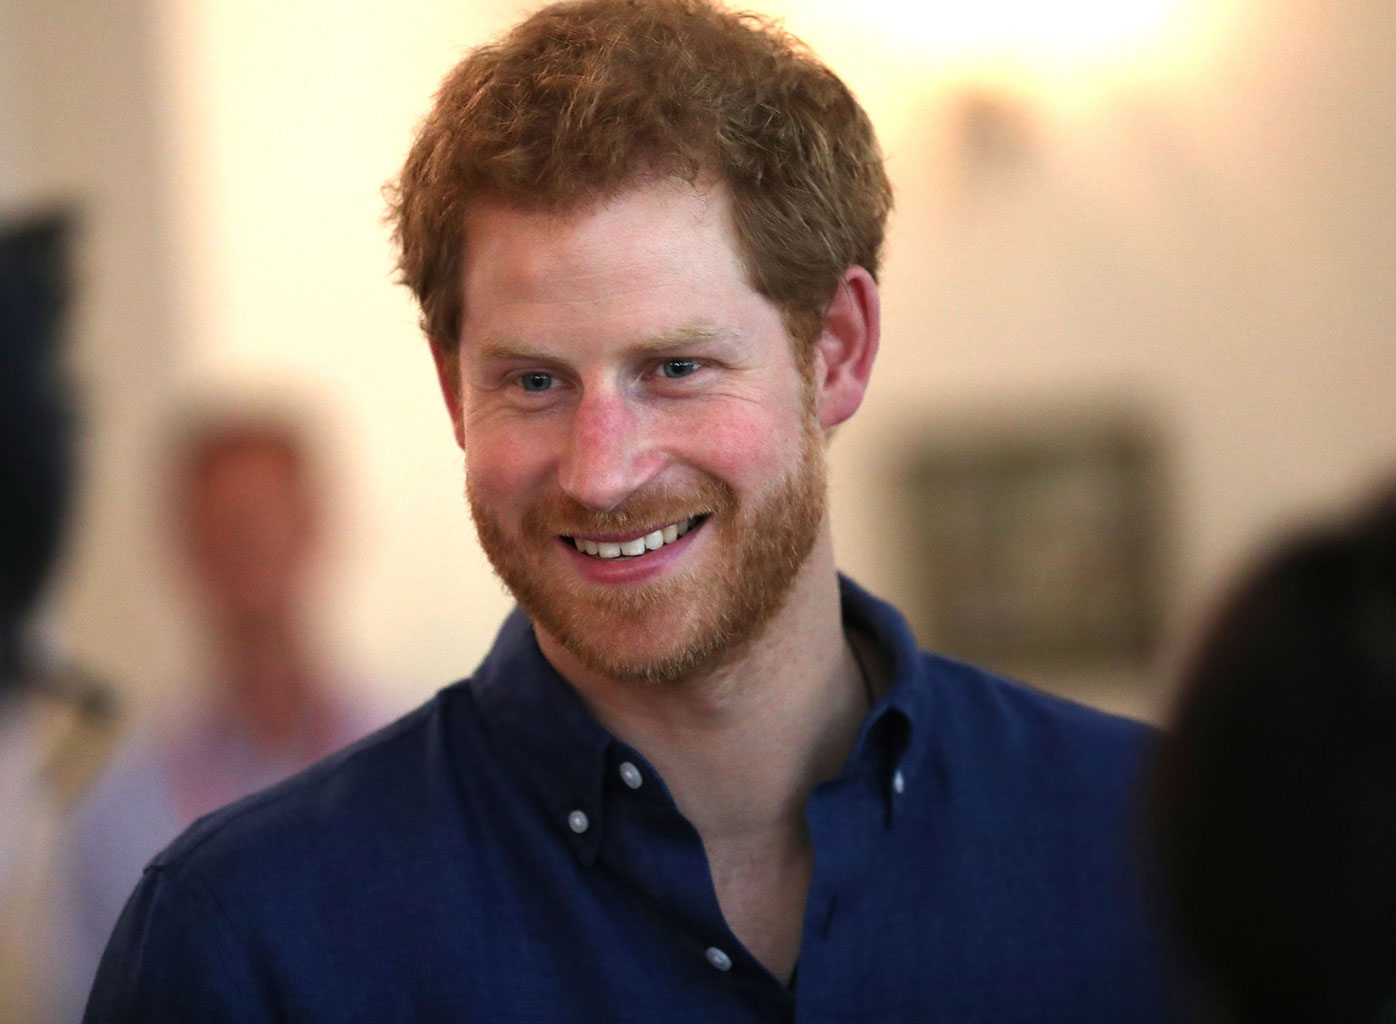 Prince Harry Upset With Reporters For Filming His Mother’s Last Moments